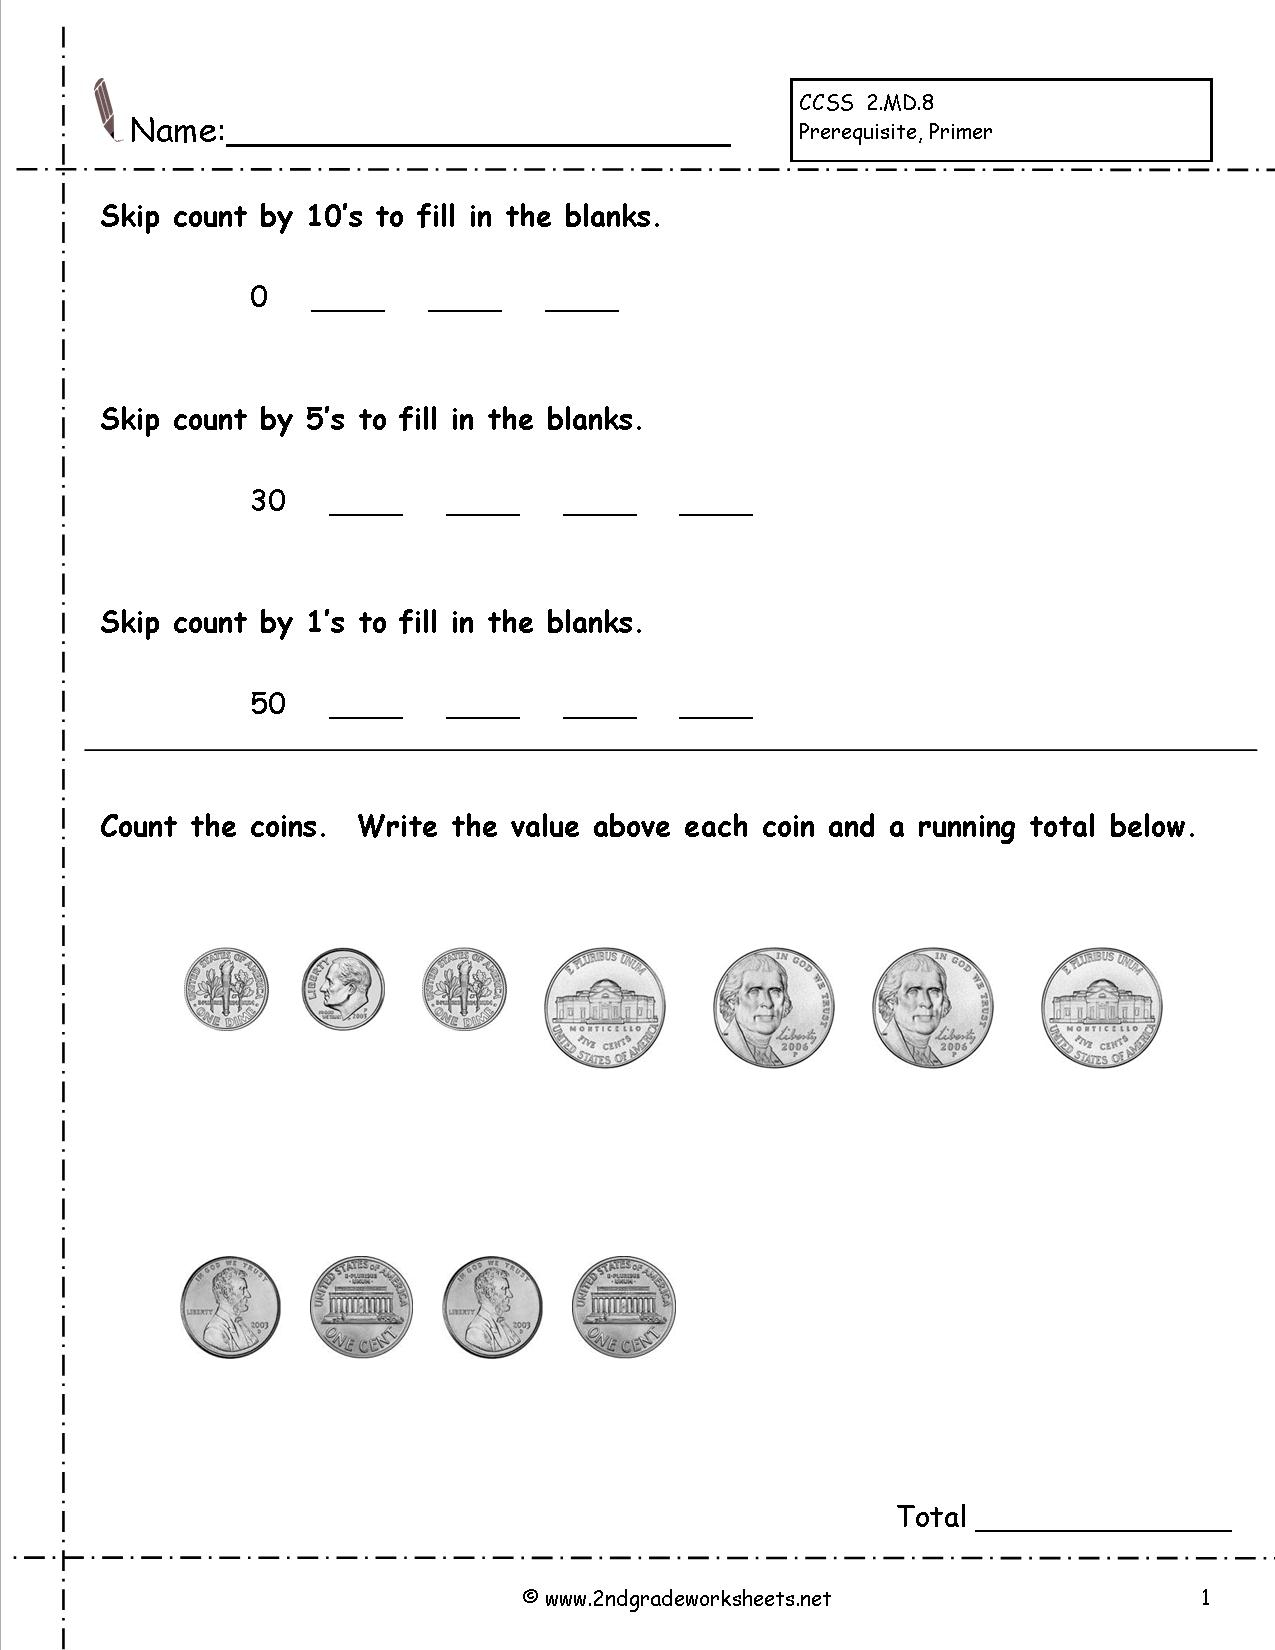 Counting Coins And Money Worksheets And Printouts - Free Printable Making Change Worksheets